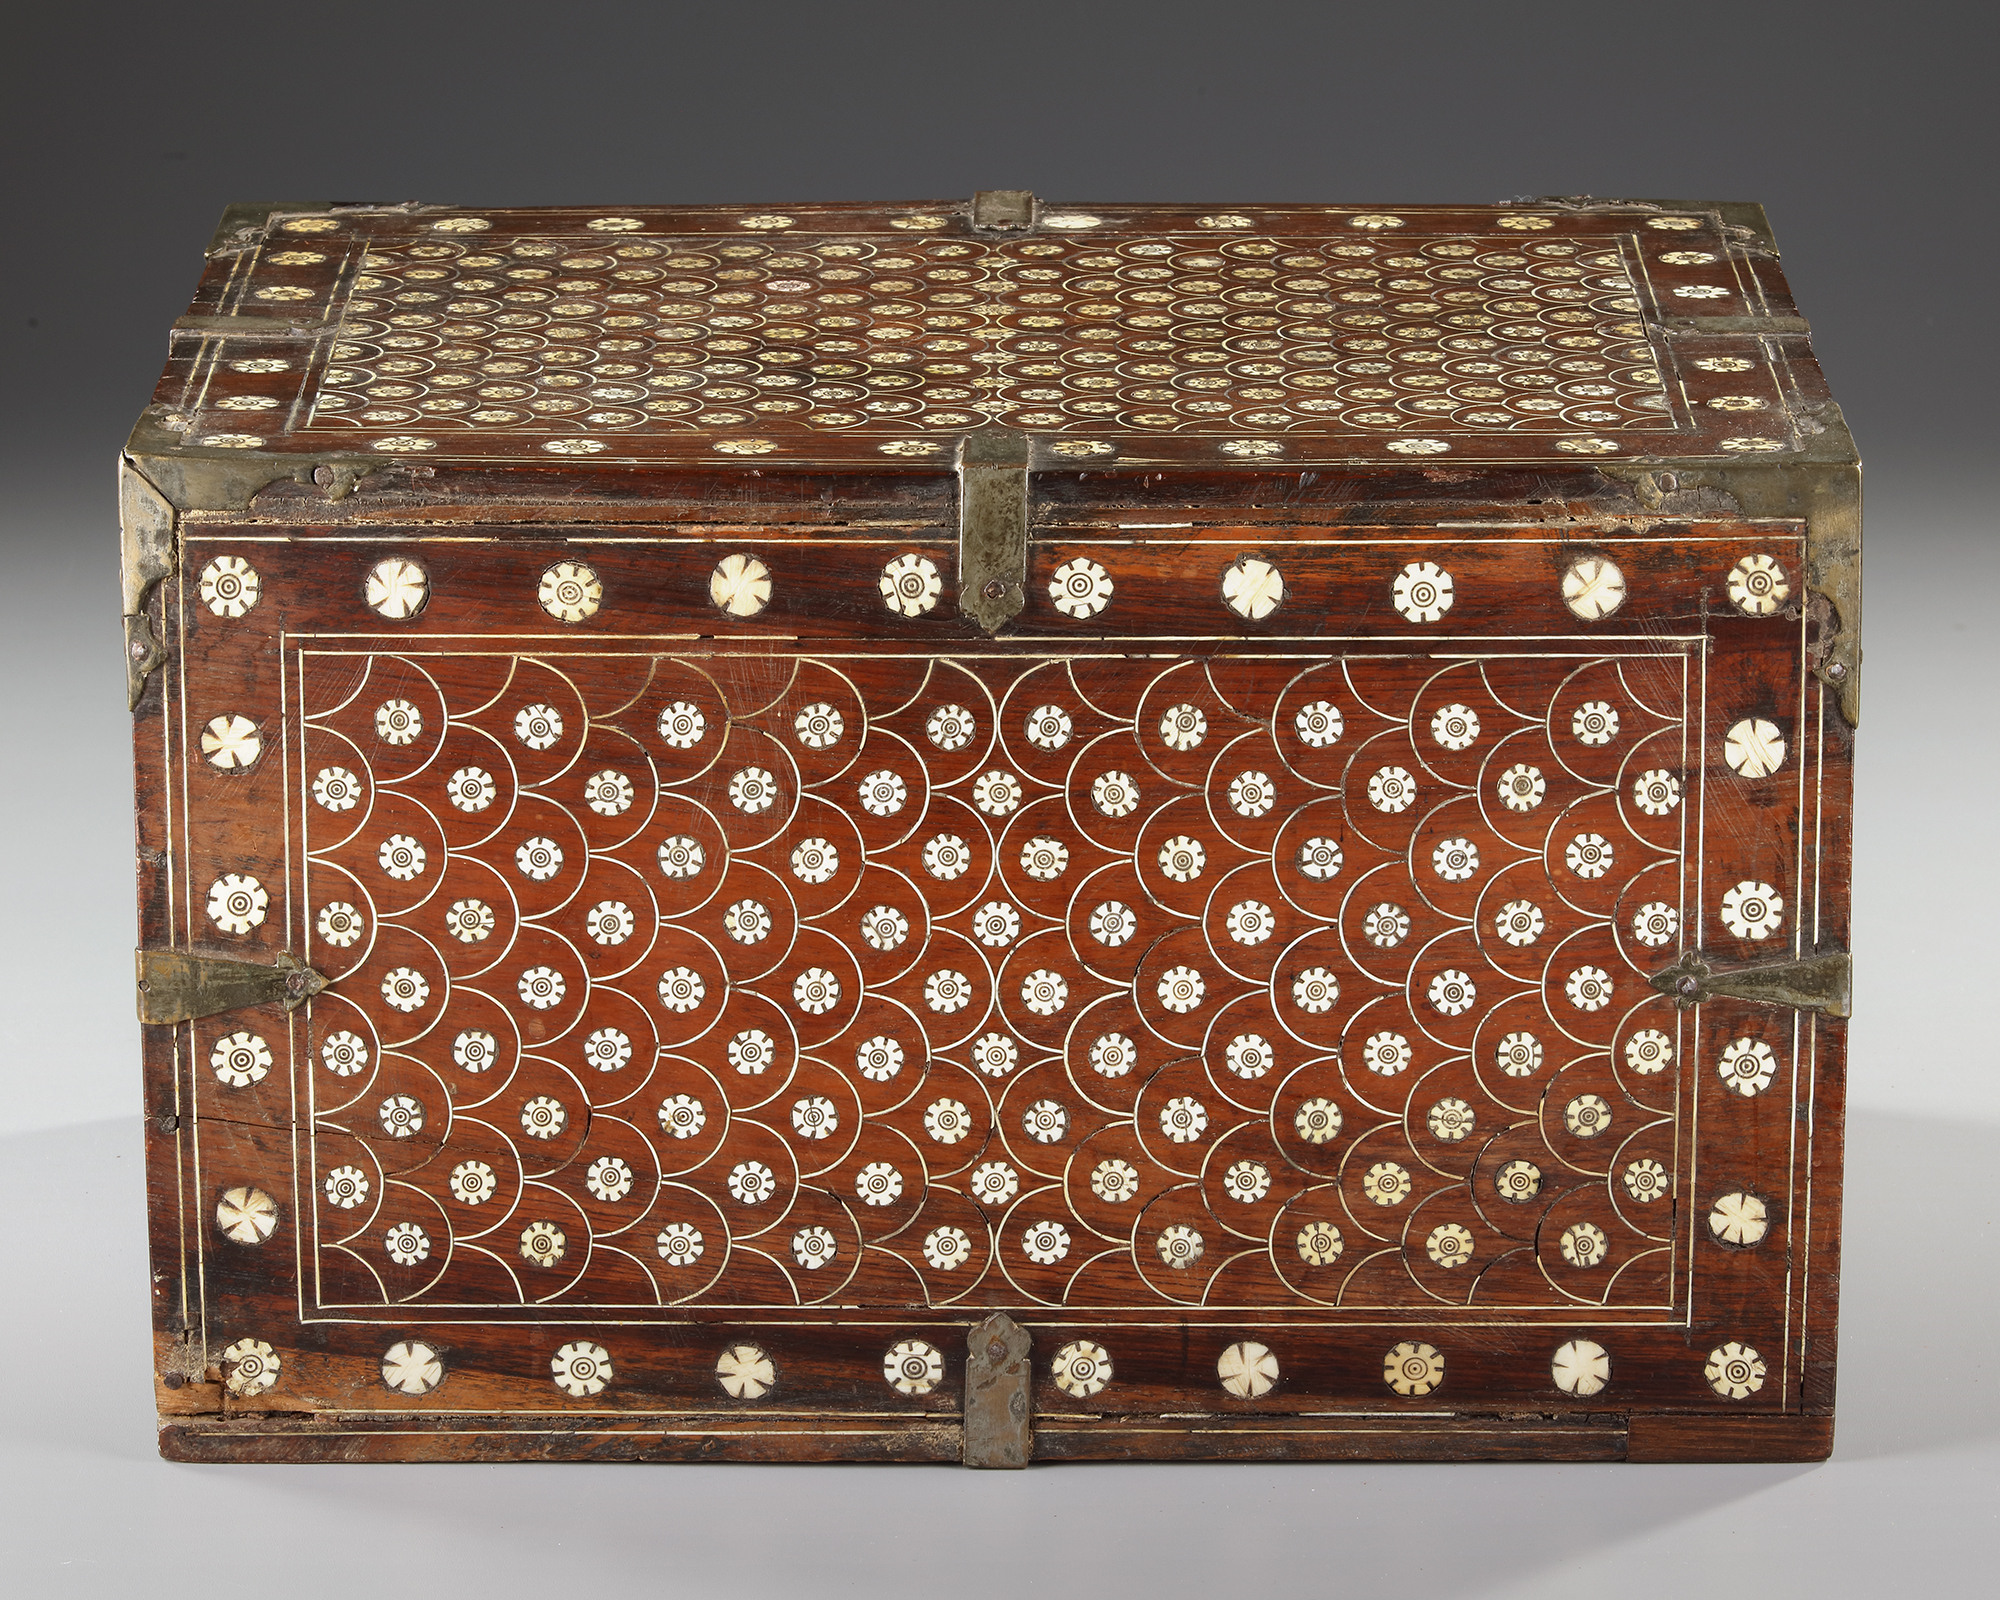 AN INDO-PORTUGUESE WOODEN AND BONE INLAID CHEST, GOA, 17TH CENTURY - Image 9 of 10